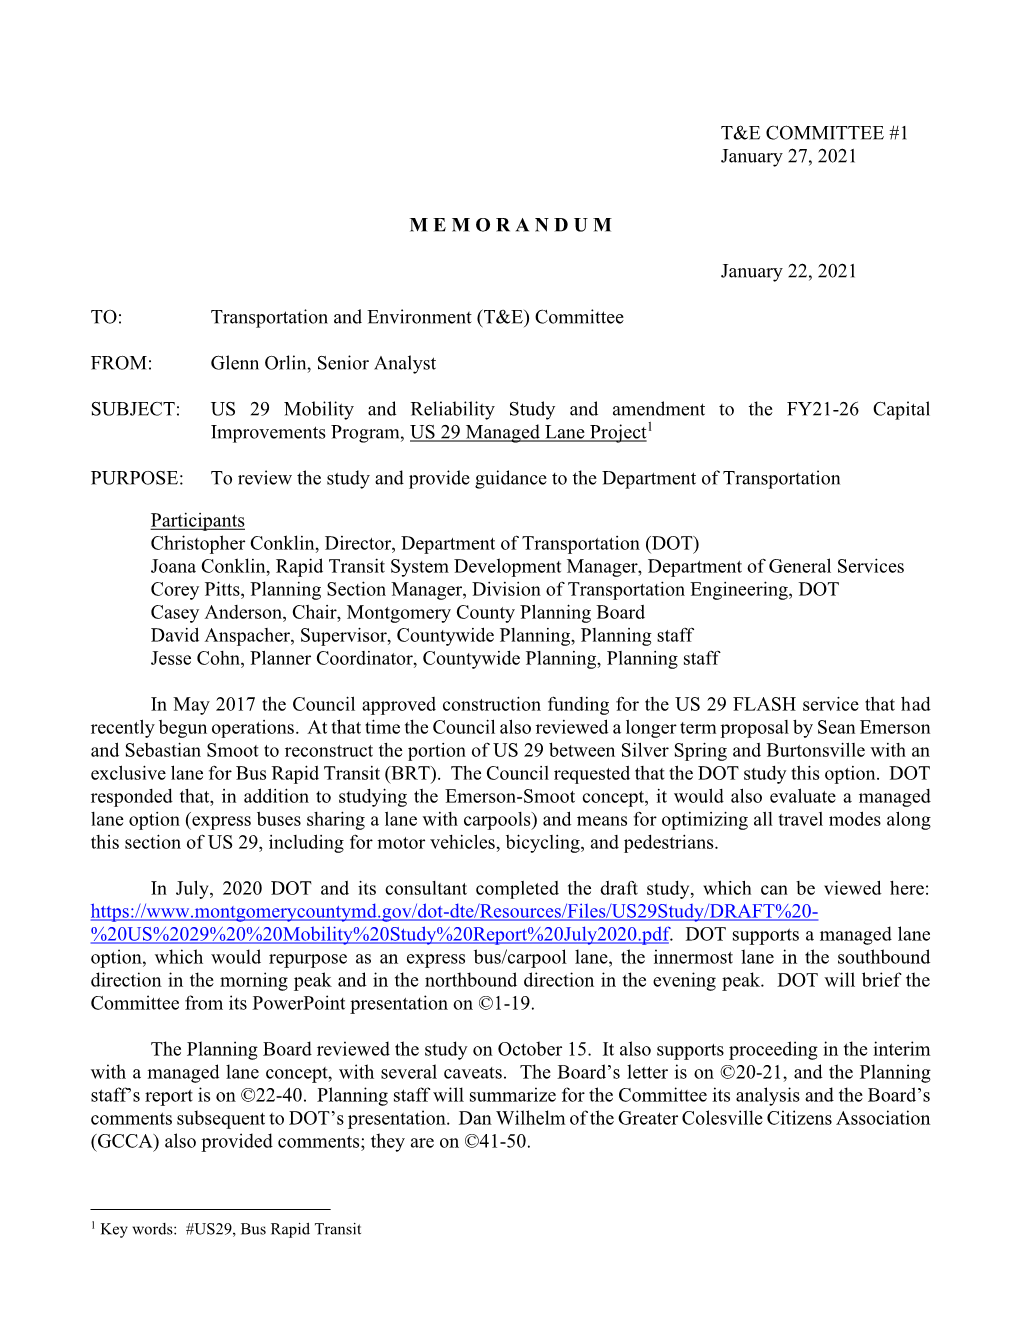 Transportation and Environment (T&E) Committee